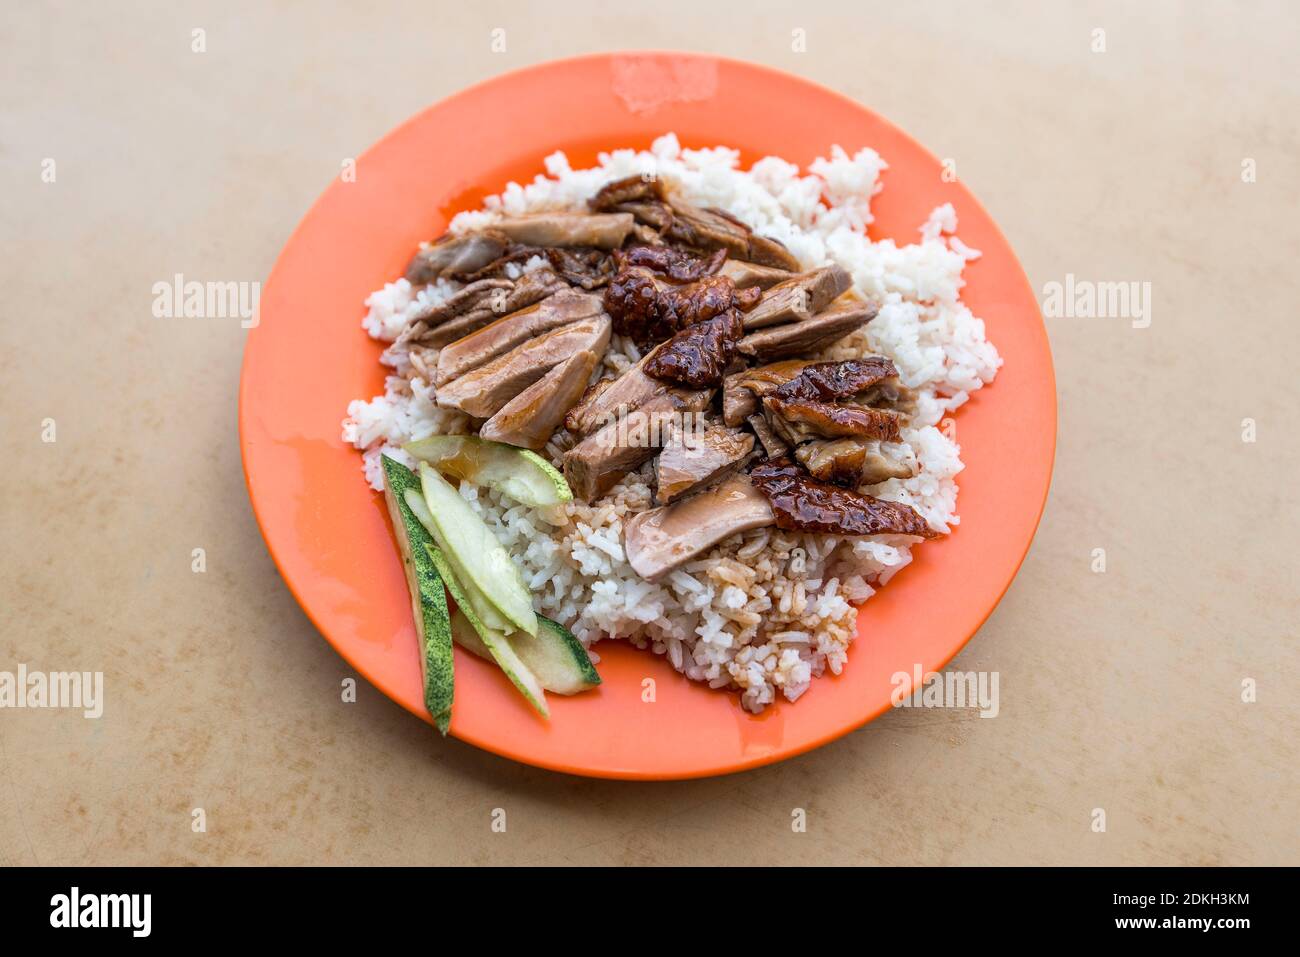 High Angle View Of Meal In Plate On Table Stock Photo